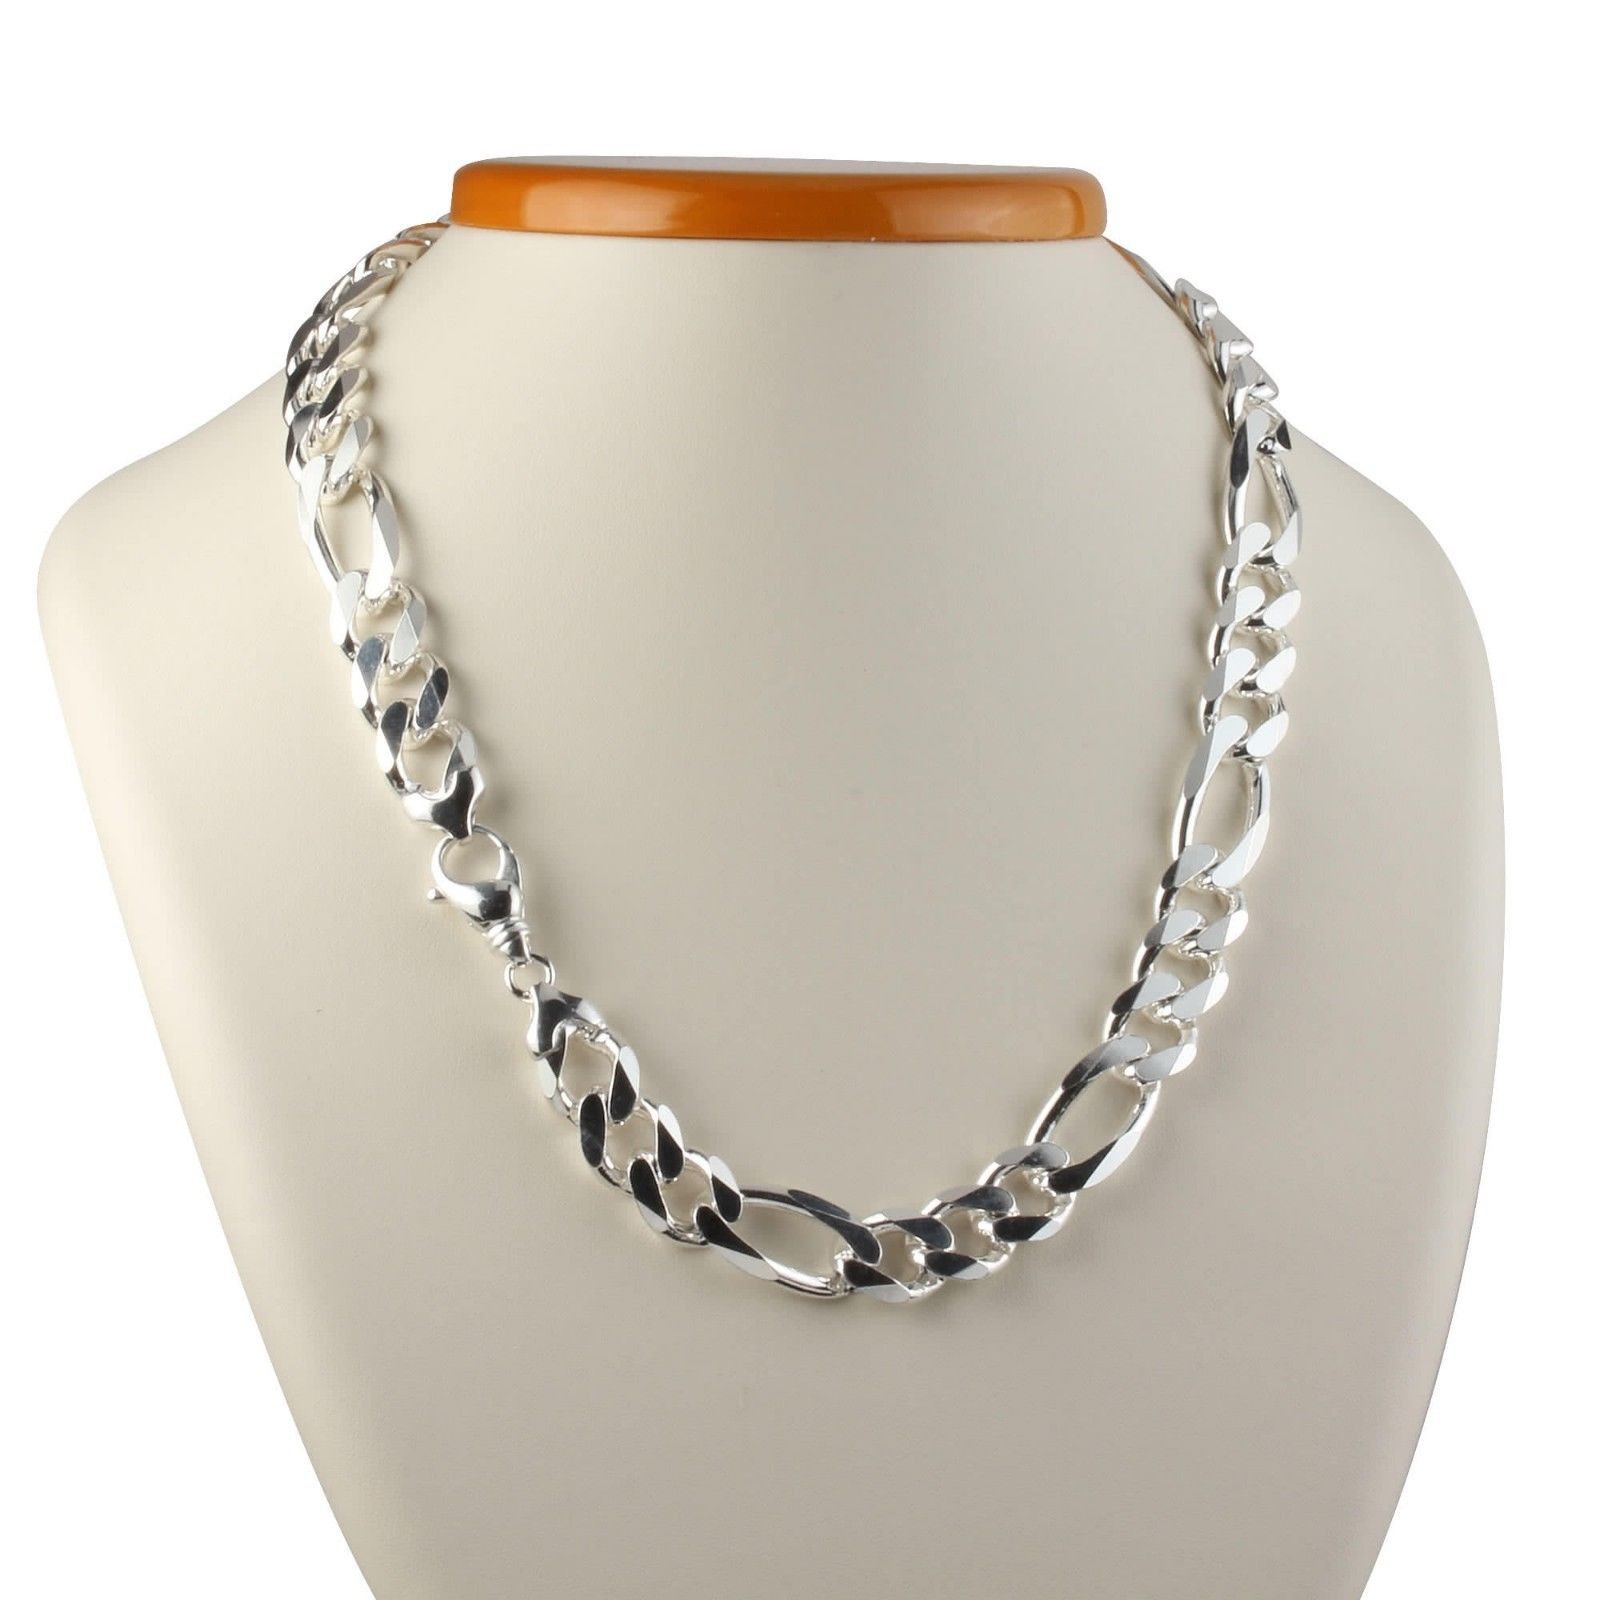 Mens Figaro Hip Hop Chain Necklace Solid 925 Sterling Silver 8mm 70 GR 26 inch - 70 cm - Image 2 of 2